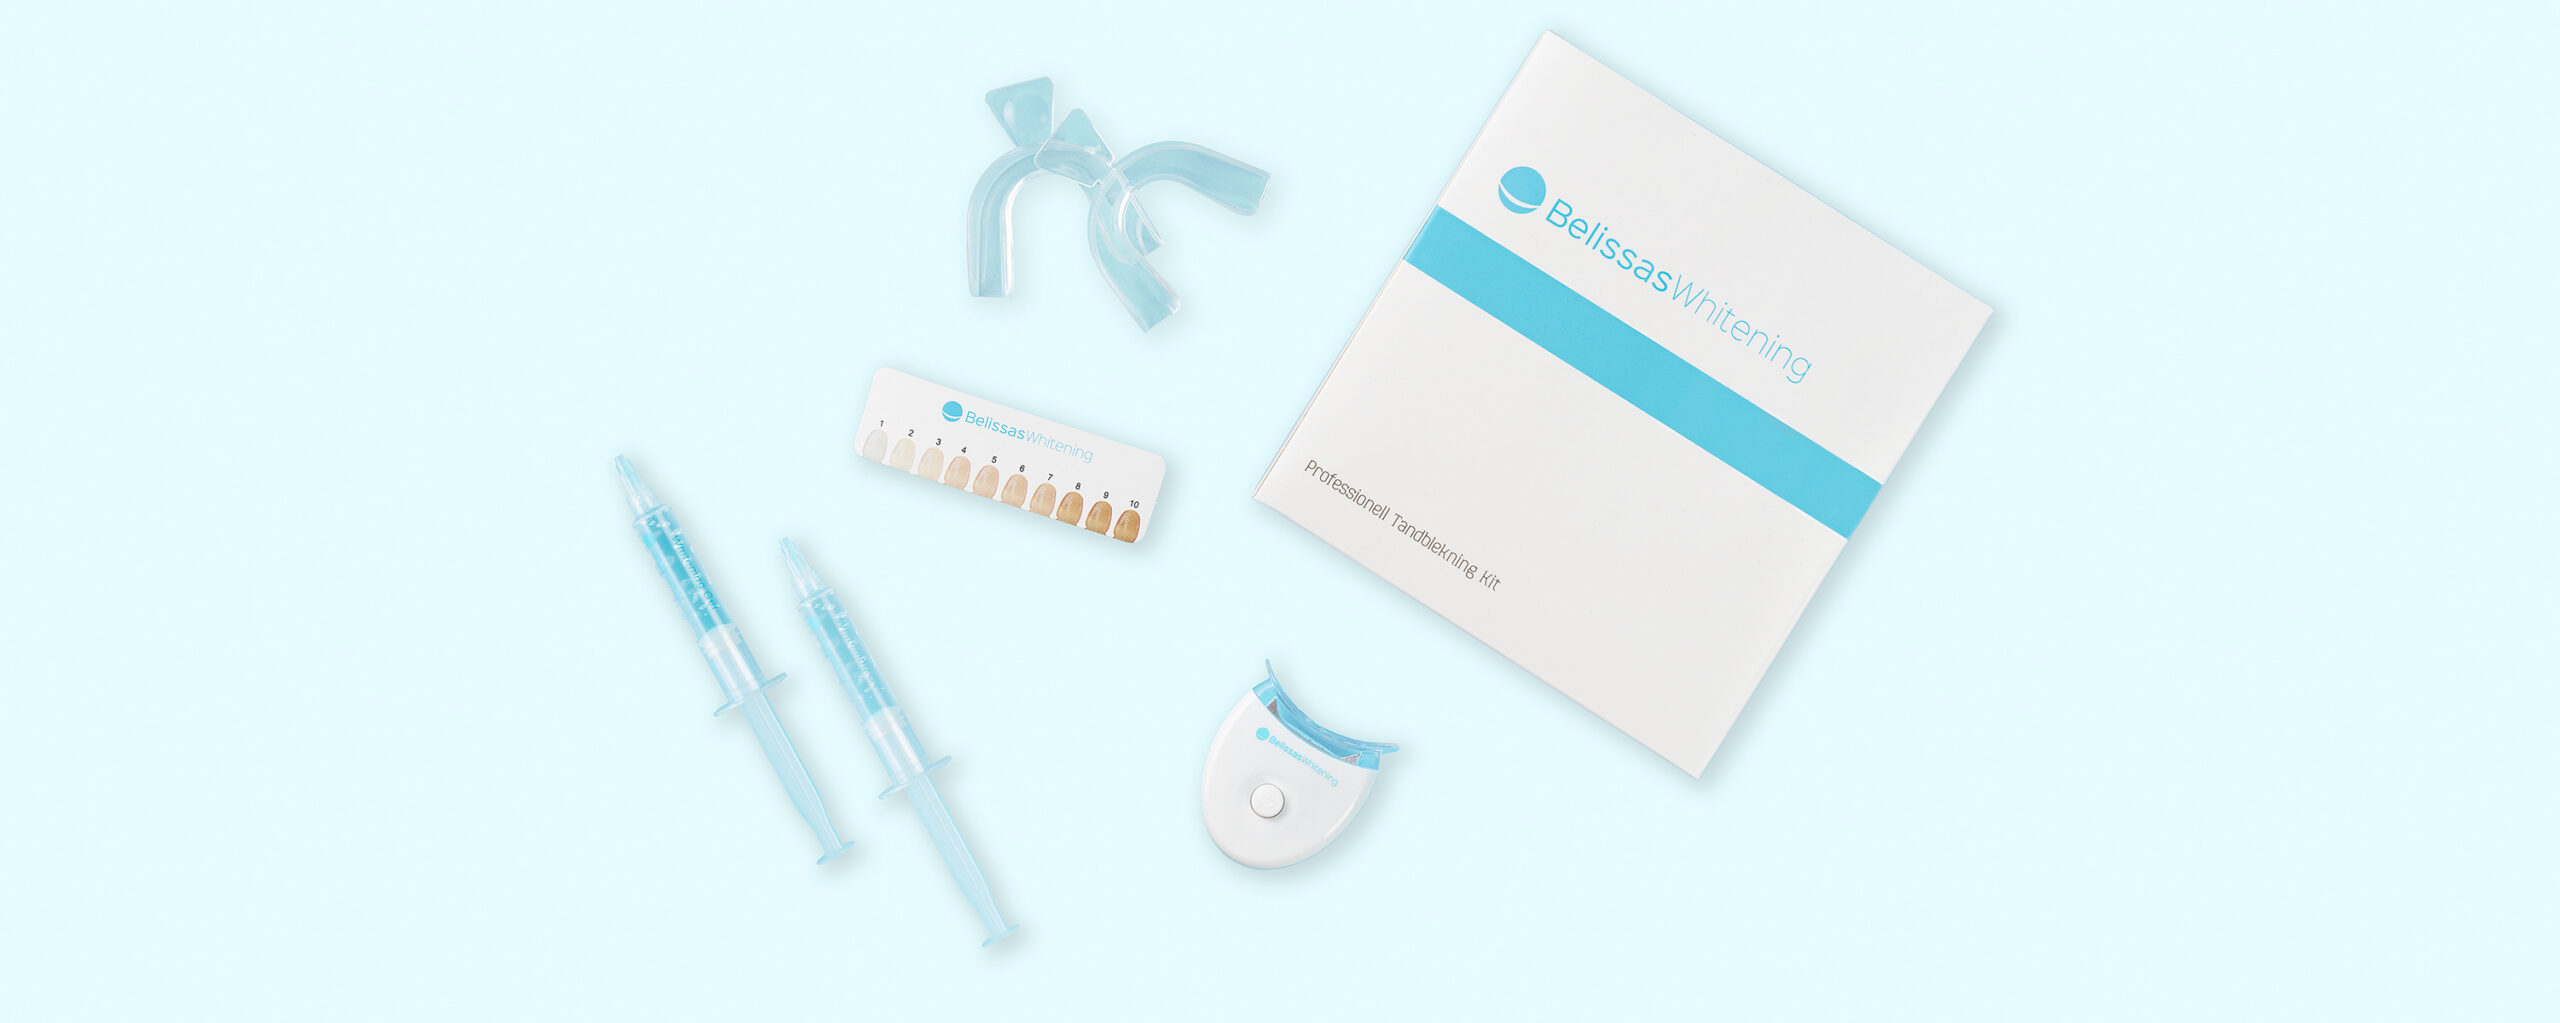 An image depicting the Belissas Teethi Whitening with other items in kit